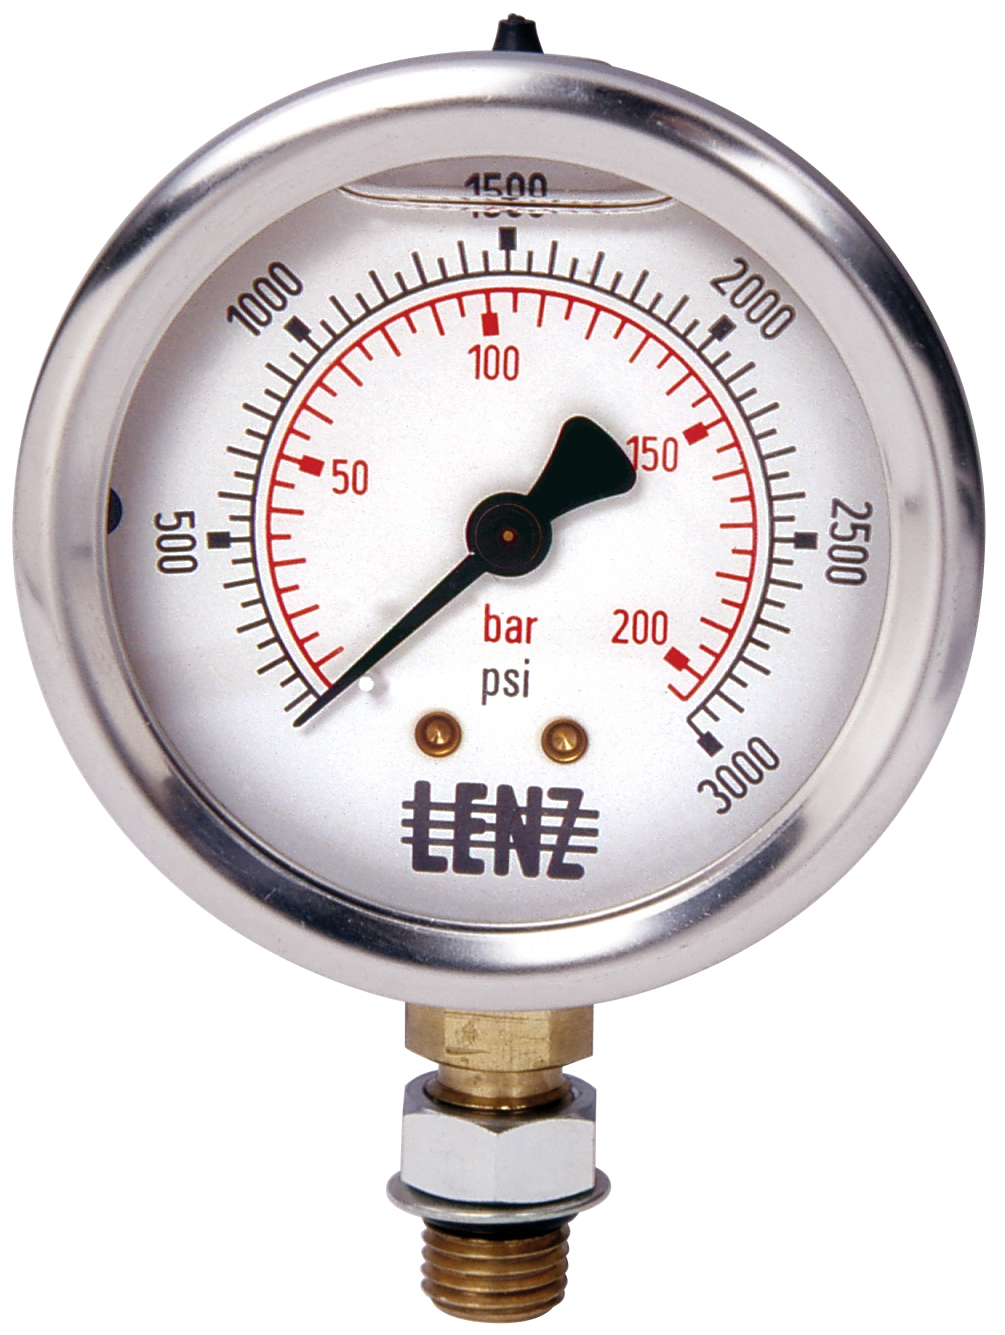 PIC Gauge 211D-254H 2.5 Dial Brass Internals Removable Stainless Steel Bezel 1/4 Male NPT Connection Size and Glass Lens 1/4 Male NPT Connection Size PIC Gauges Bottom Mount Dry Pressure Gauge with a Stainless Steel Case 0/300 psi Range 